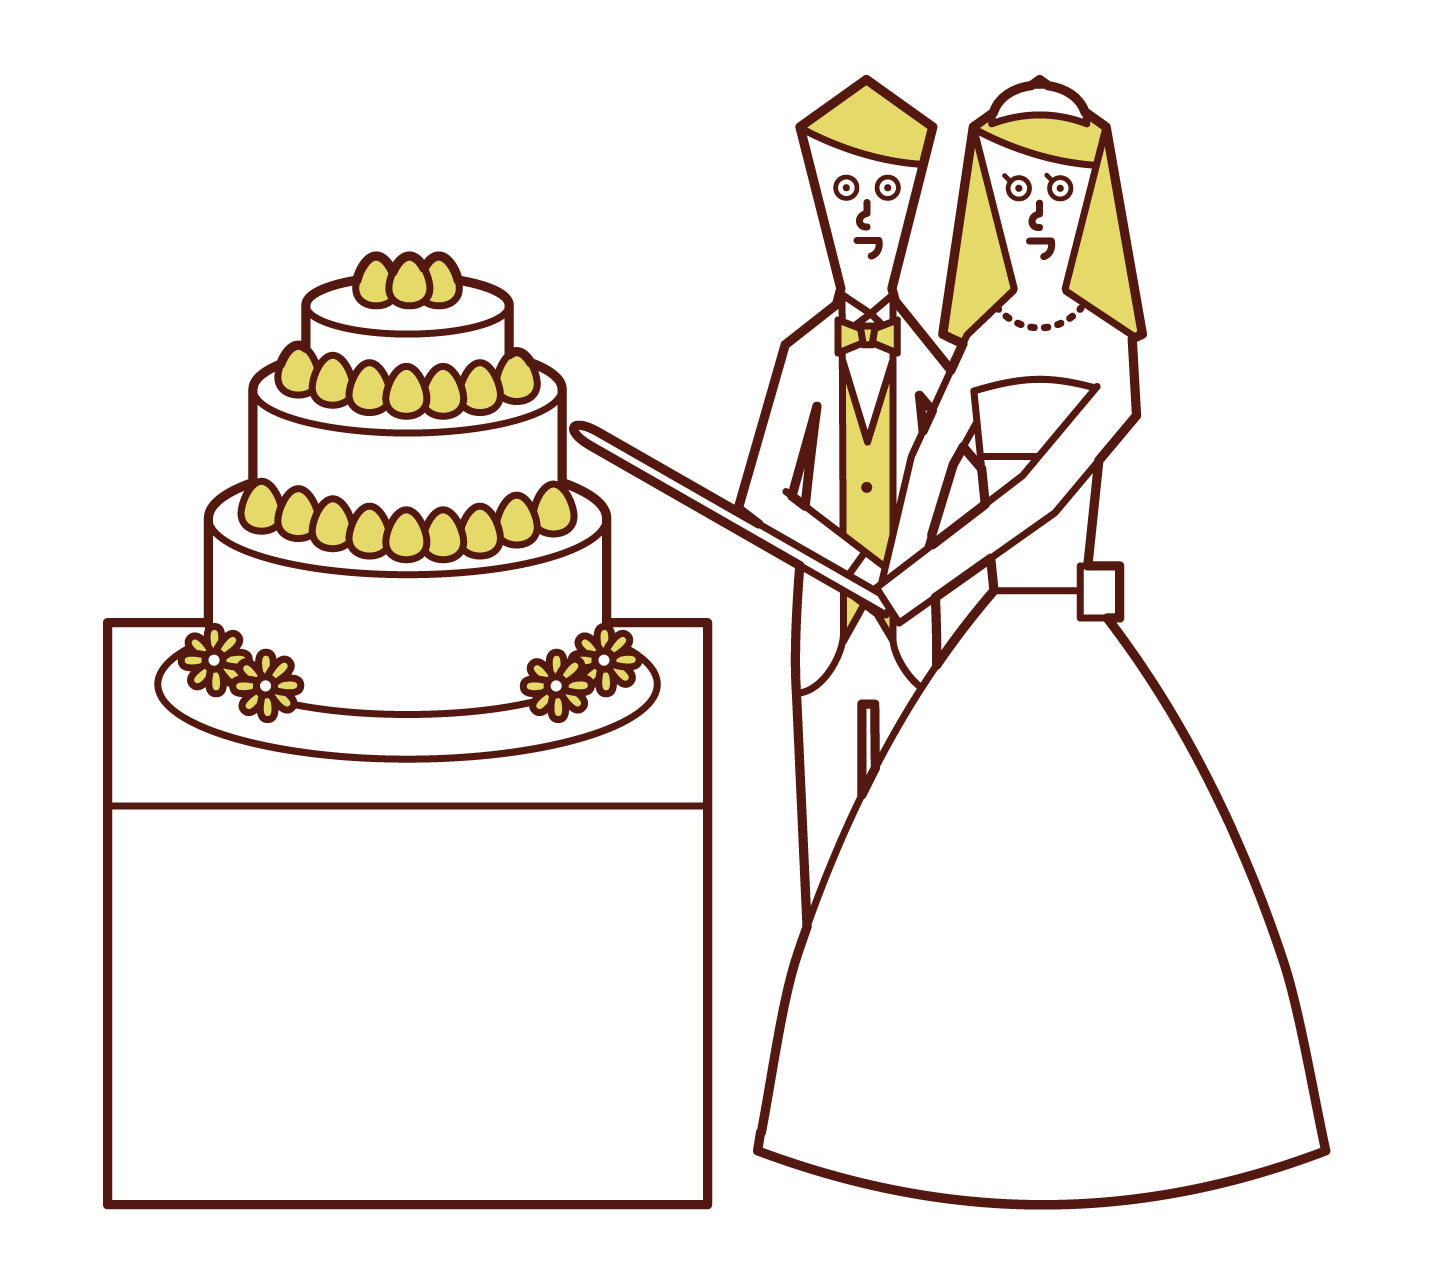 Illustration of bride and groom cutting cake